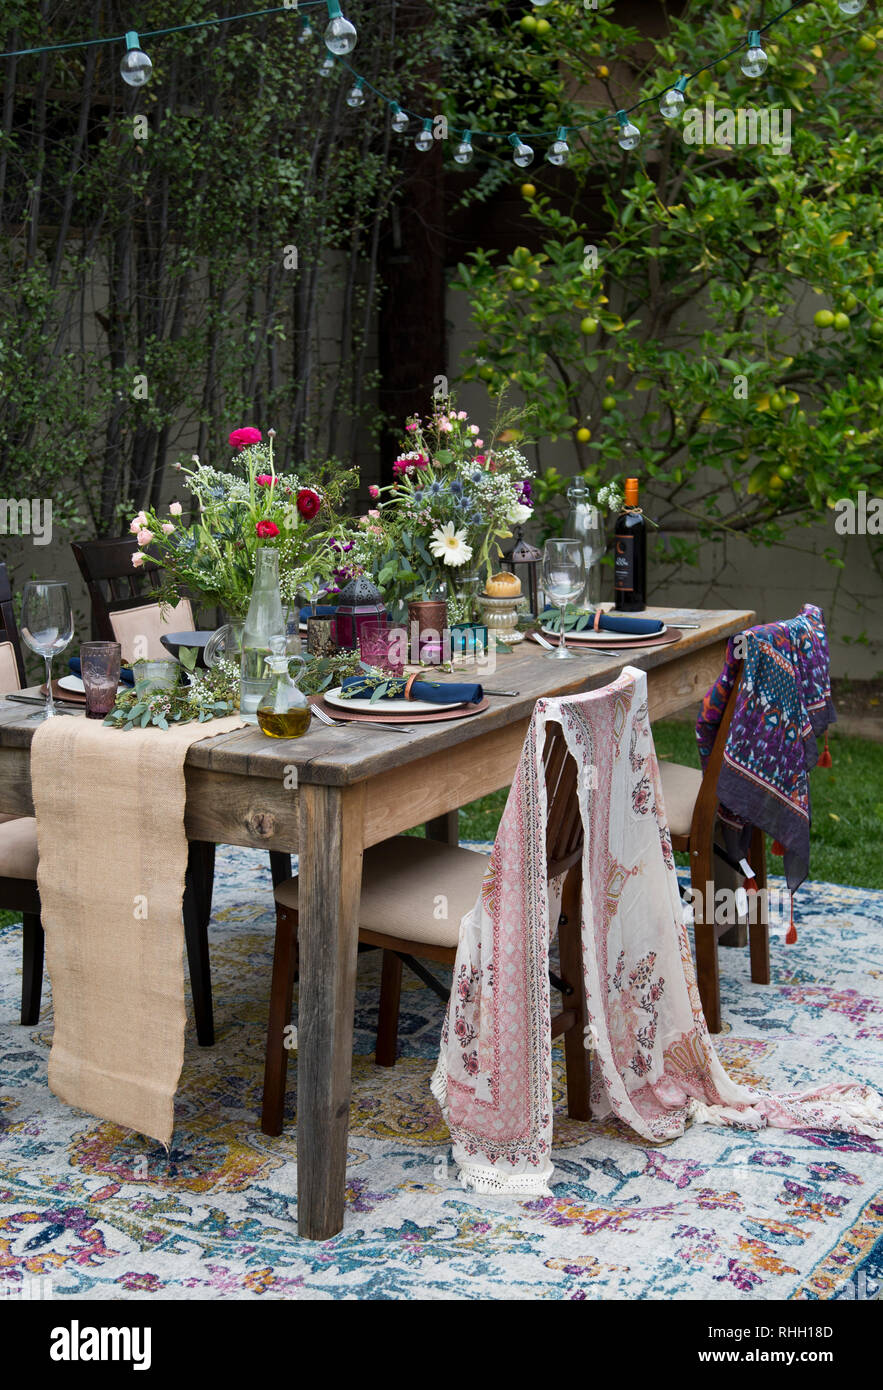 Outdoor backyard dinner party table setting with flowers, place settings, string lights and fabric. Stock Photo